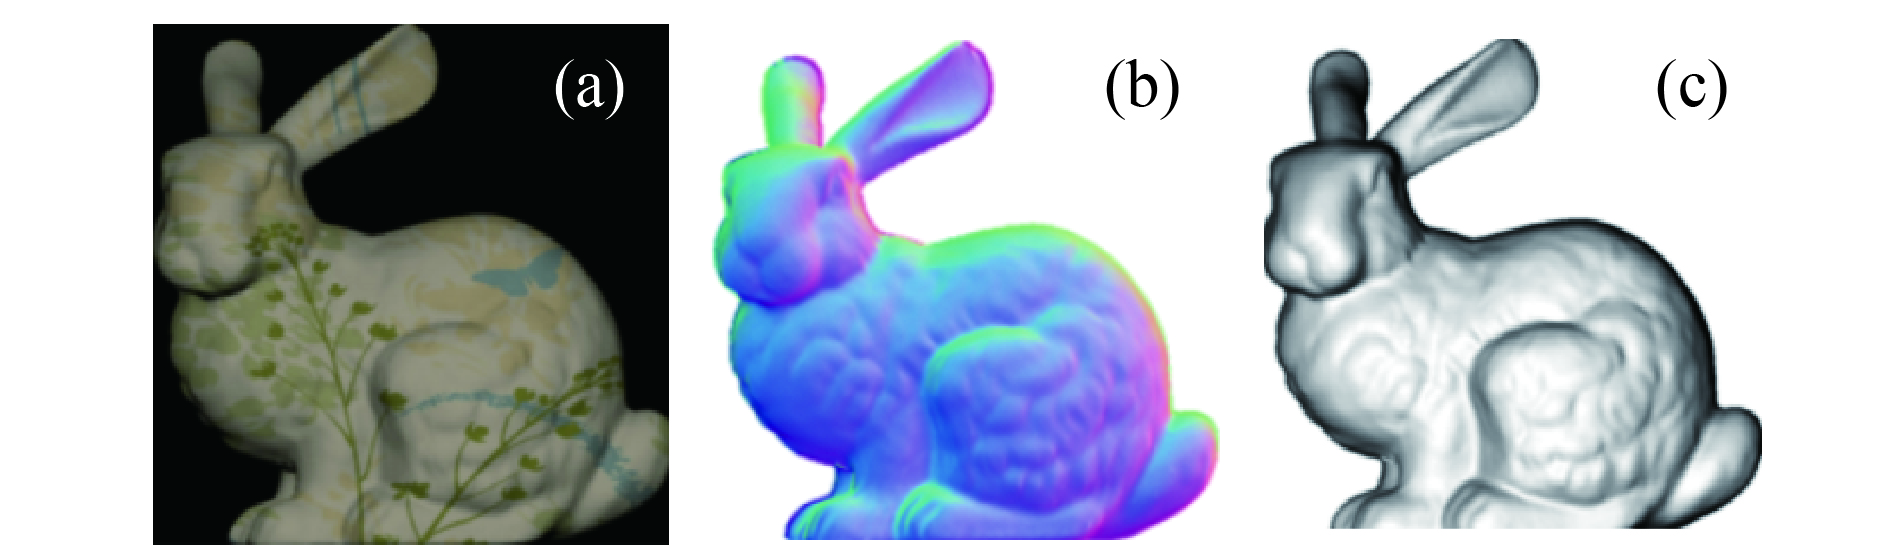 Measurement results of Stanford rabbits by photometric stereo method. (a) Stanford rabbit model; (b) Normal map; (c) Reconstruction map